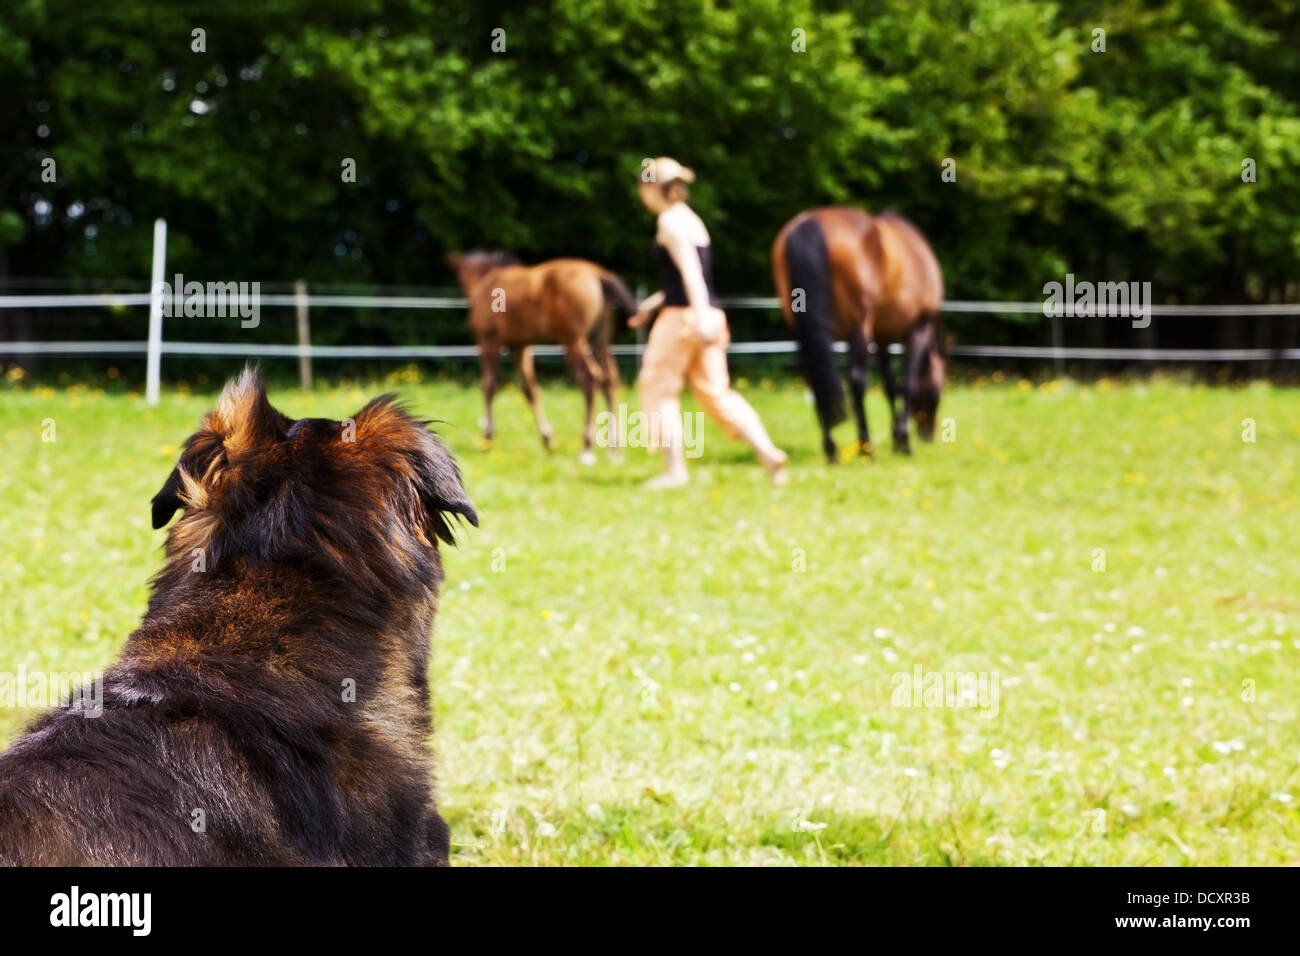 mongrel dog is watching woman and horses Stock Photo